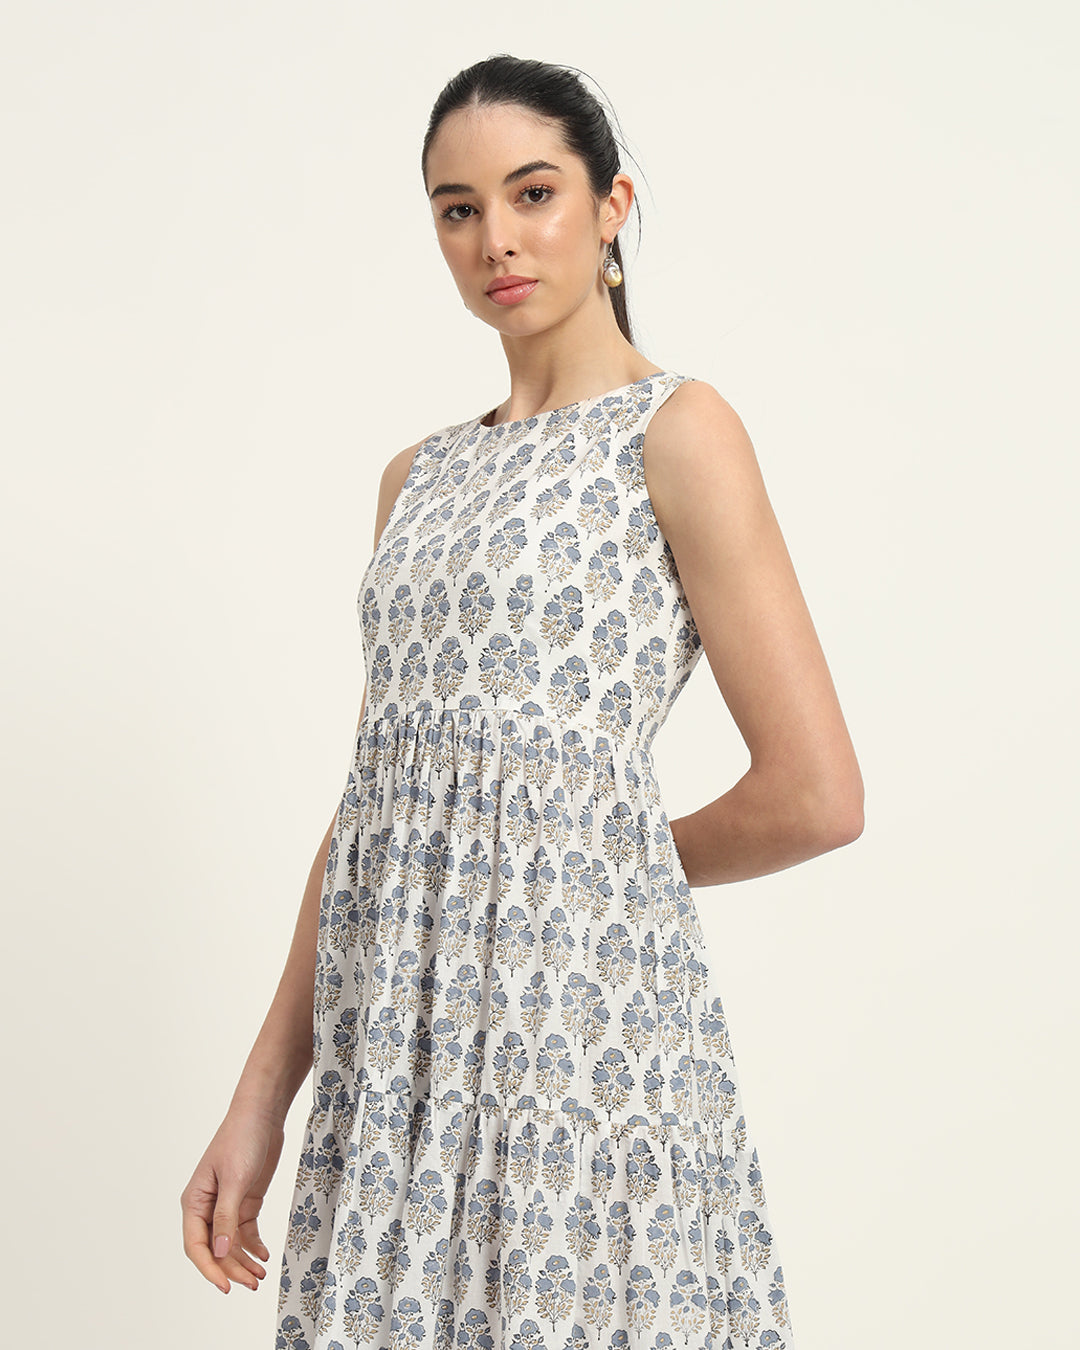 The Sky's The Limit Tiered Dress